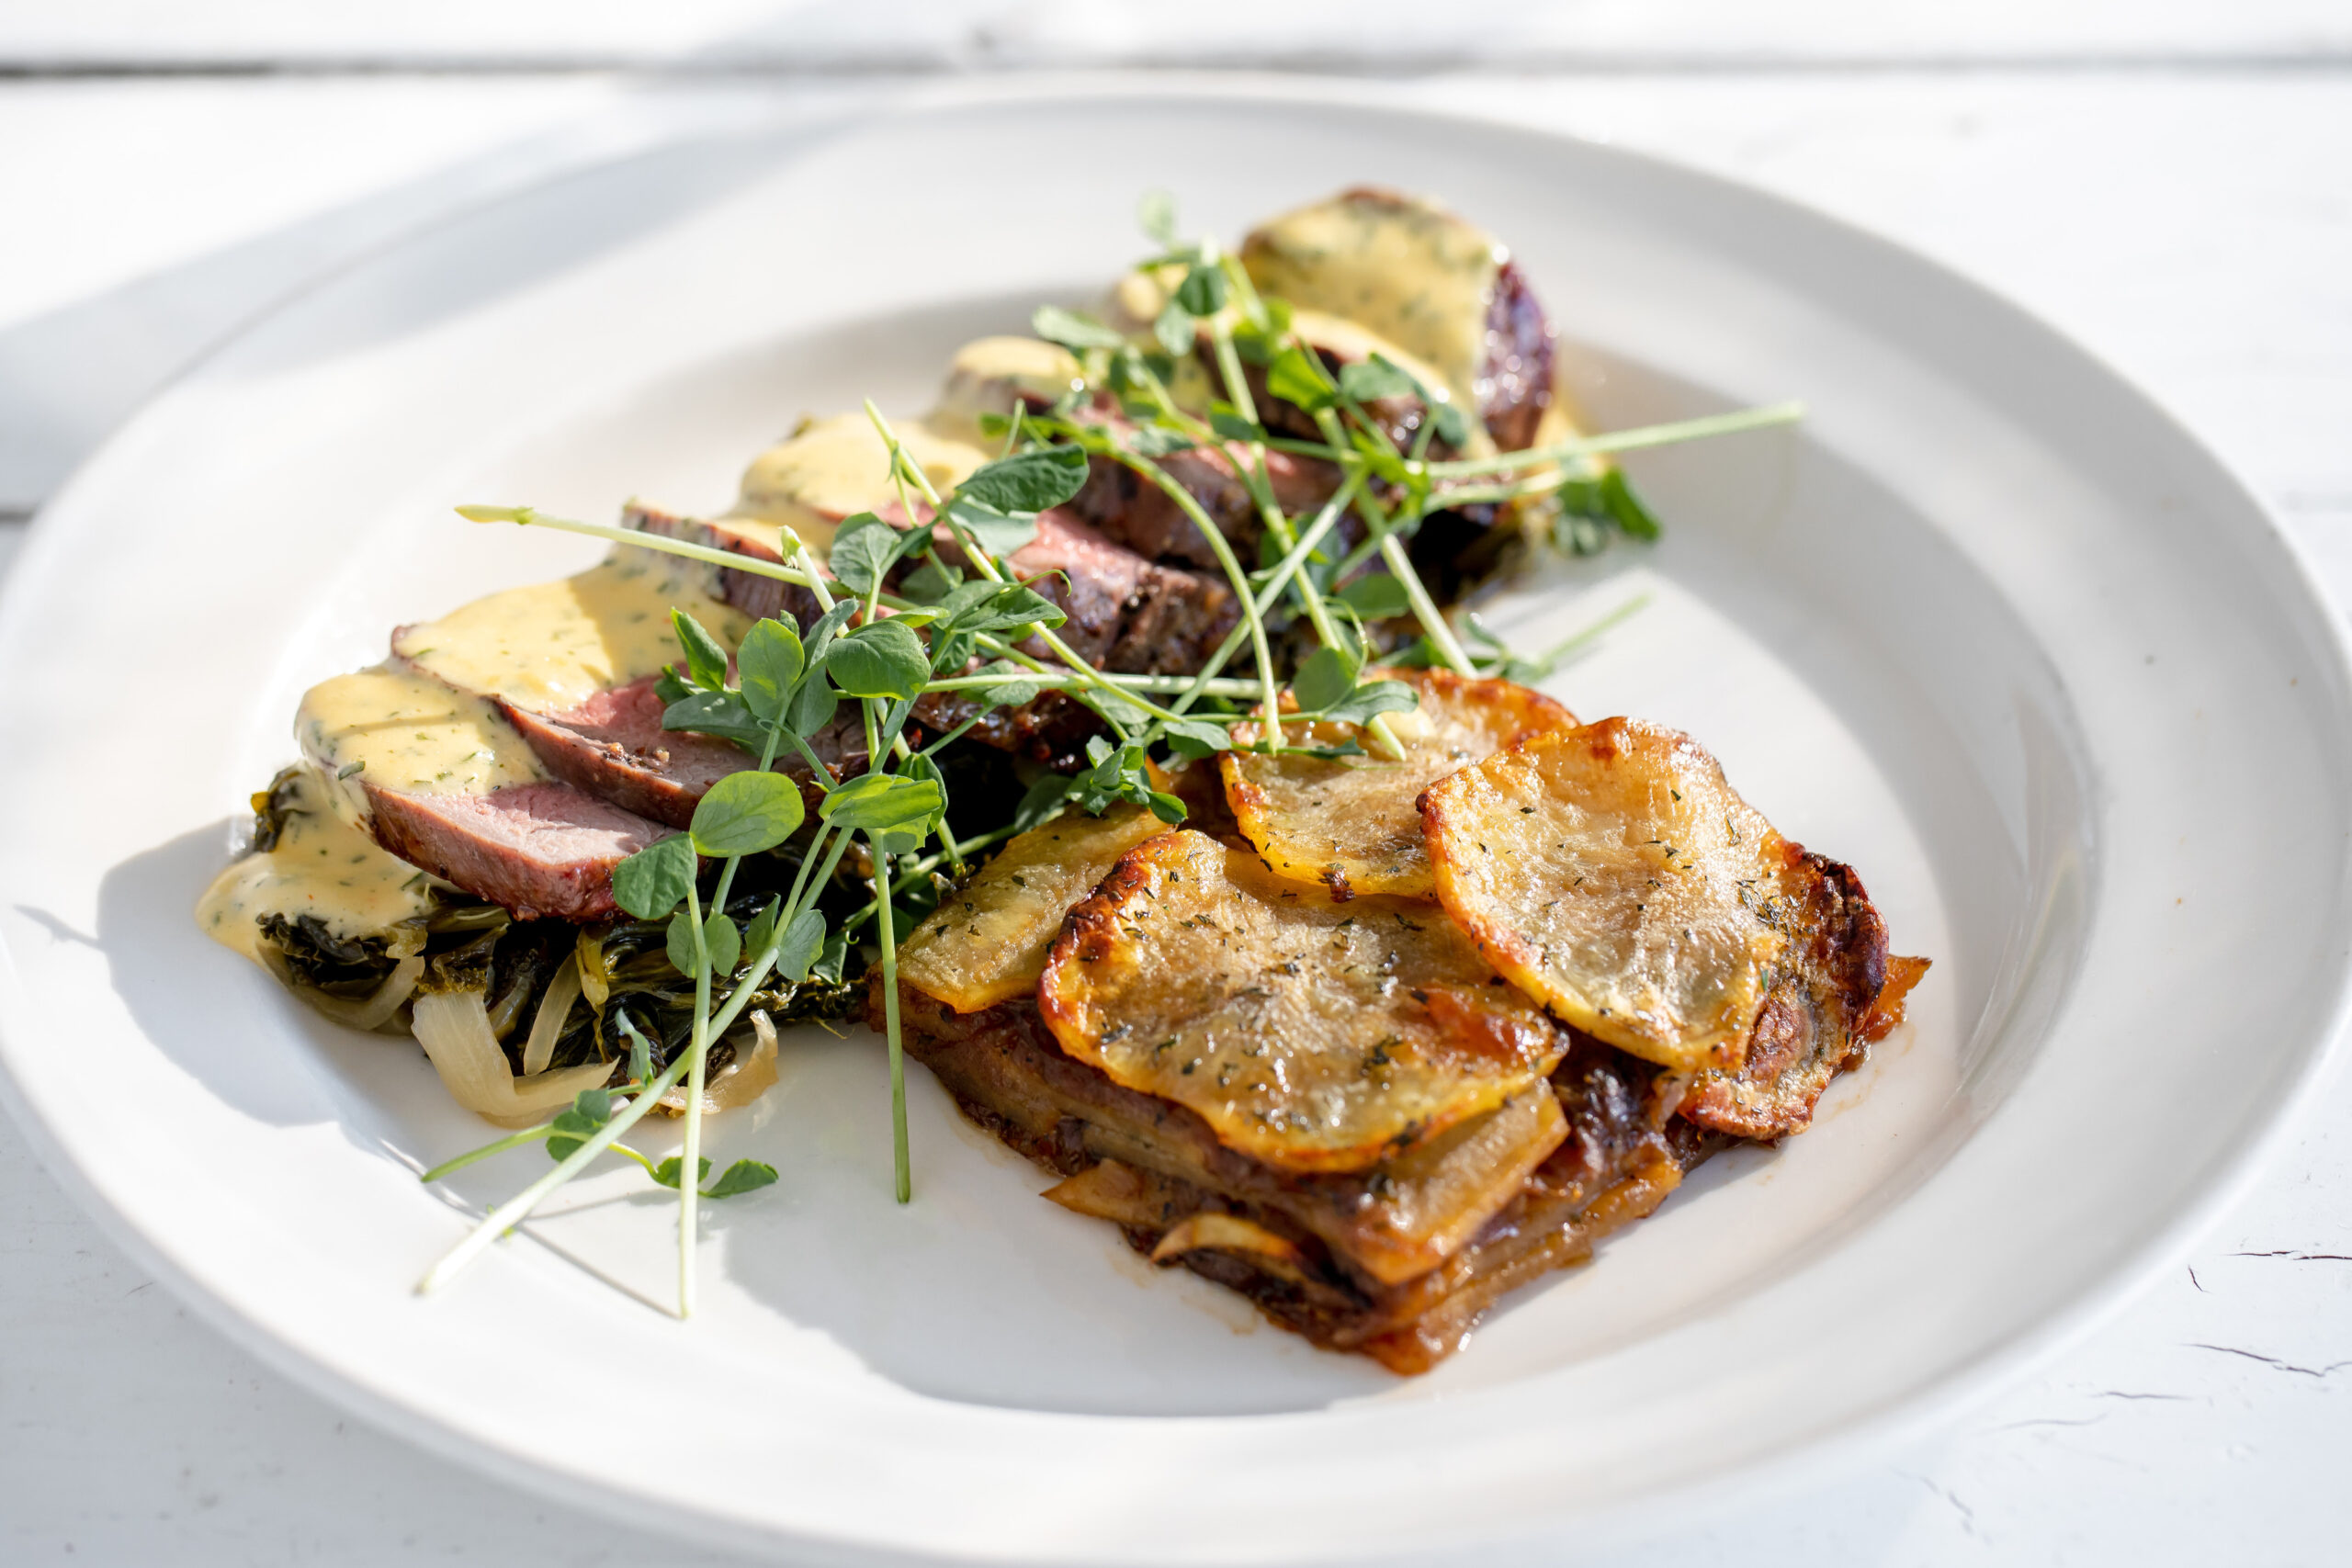 A Wickman House dish with potatoes, meat and microgreens.